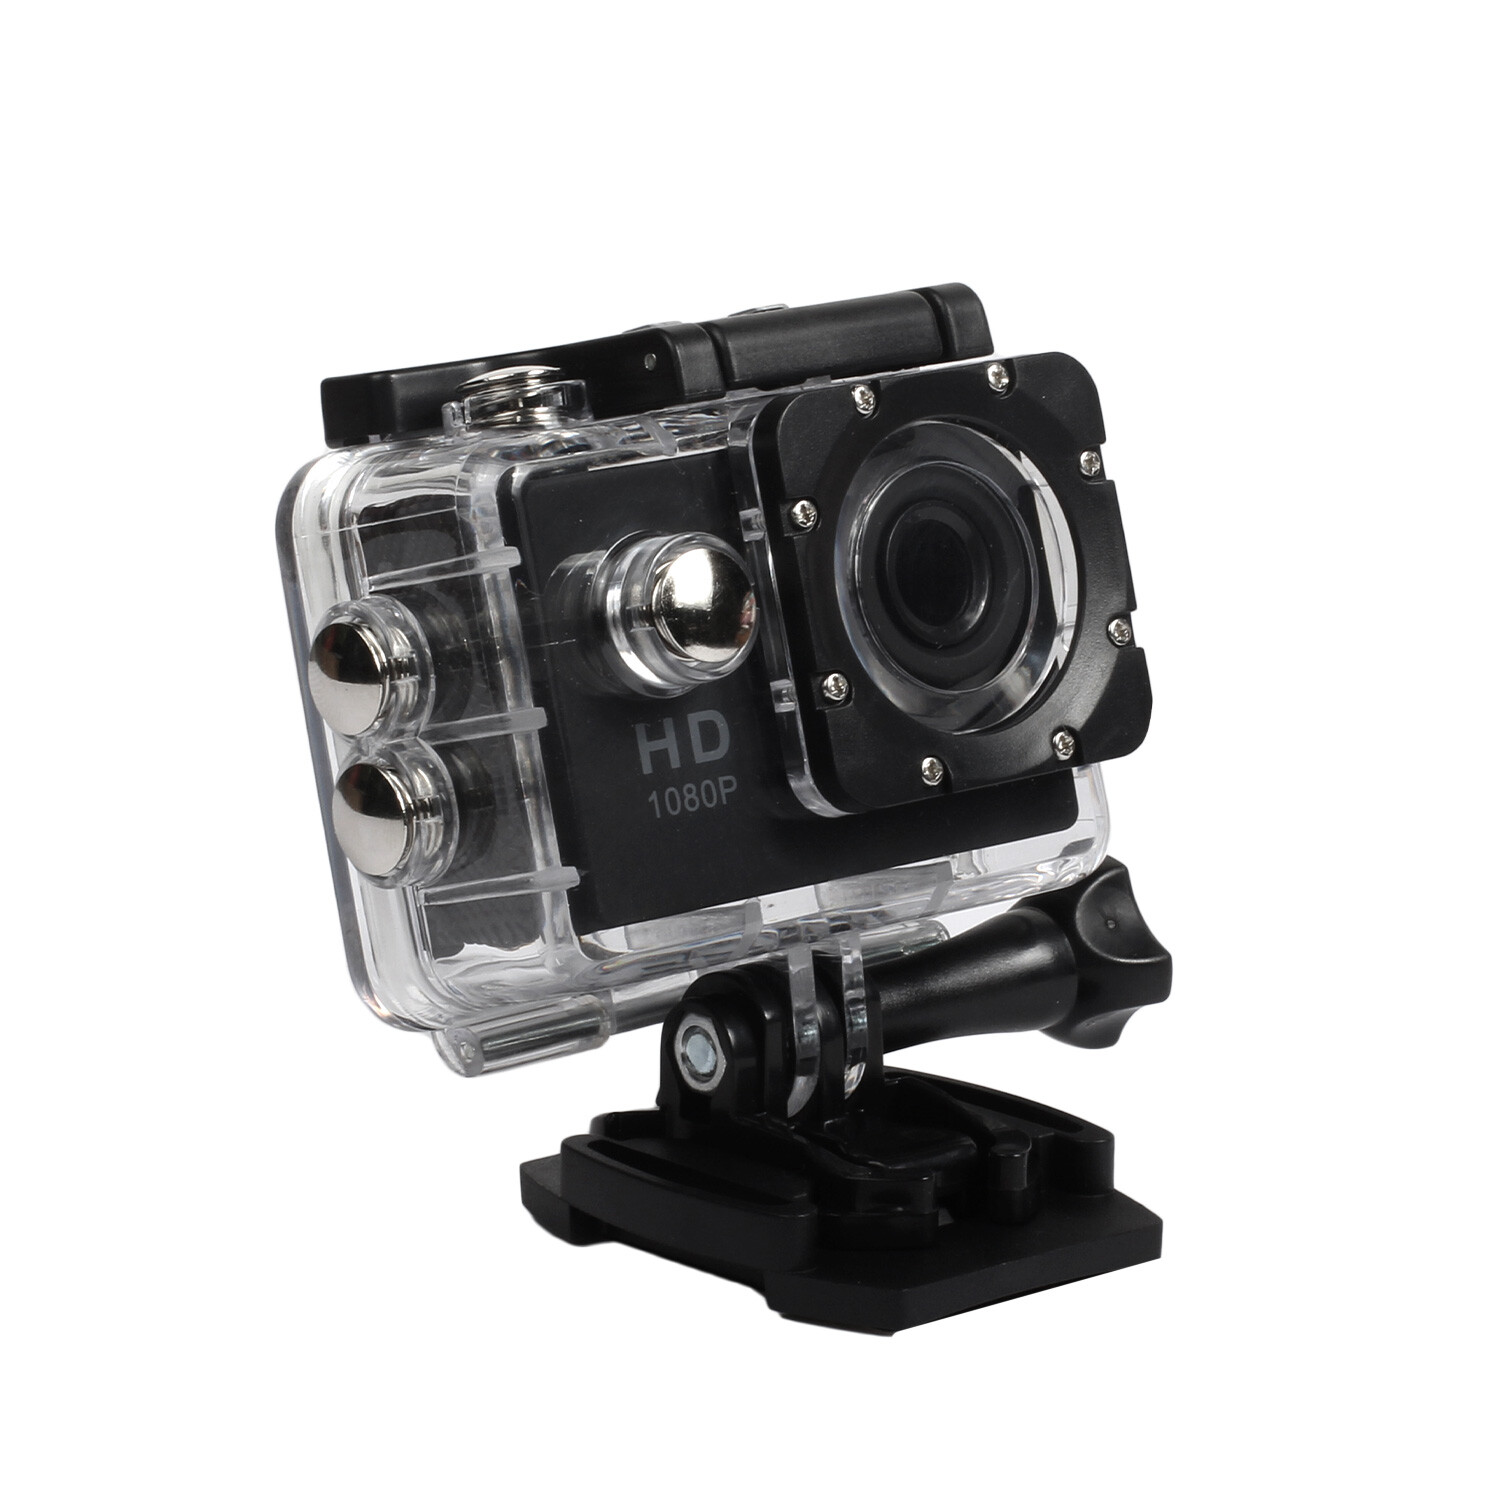 Action Camera with SD Card - Black Image 1